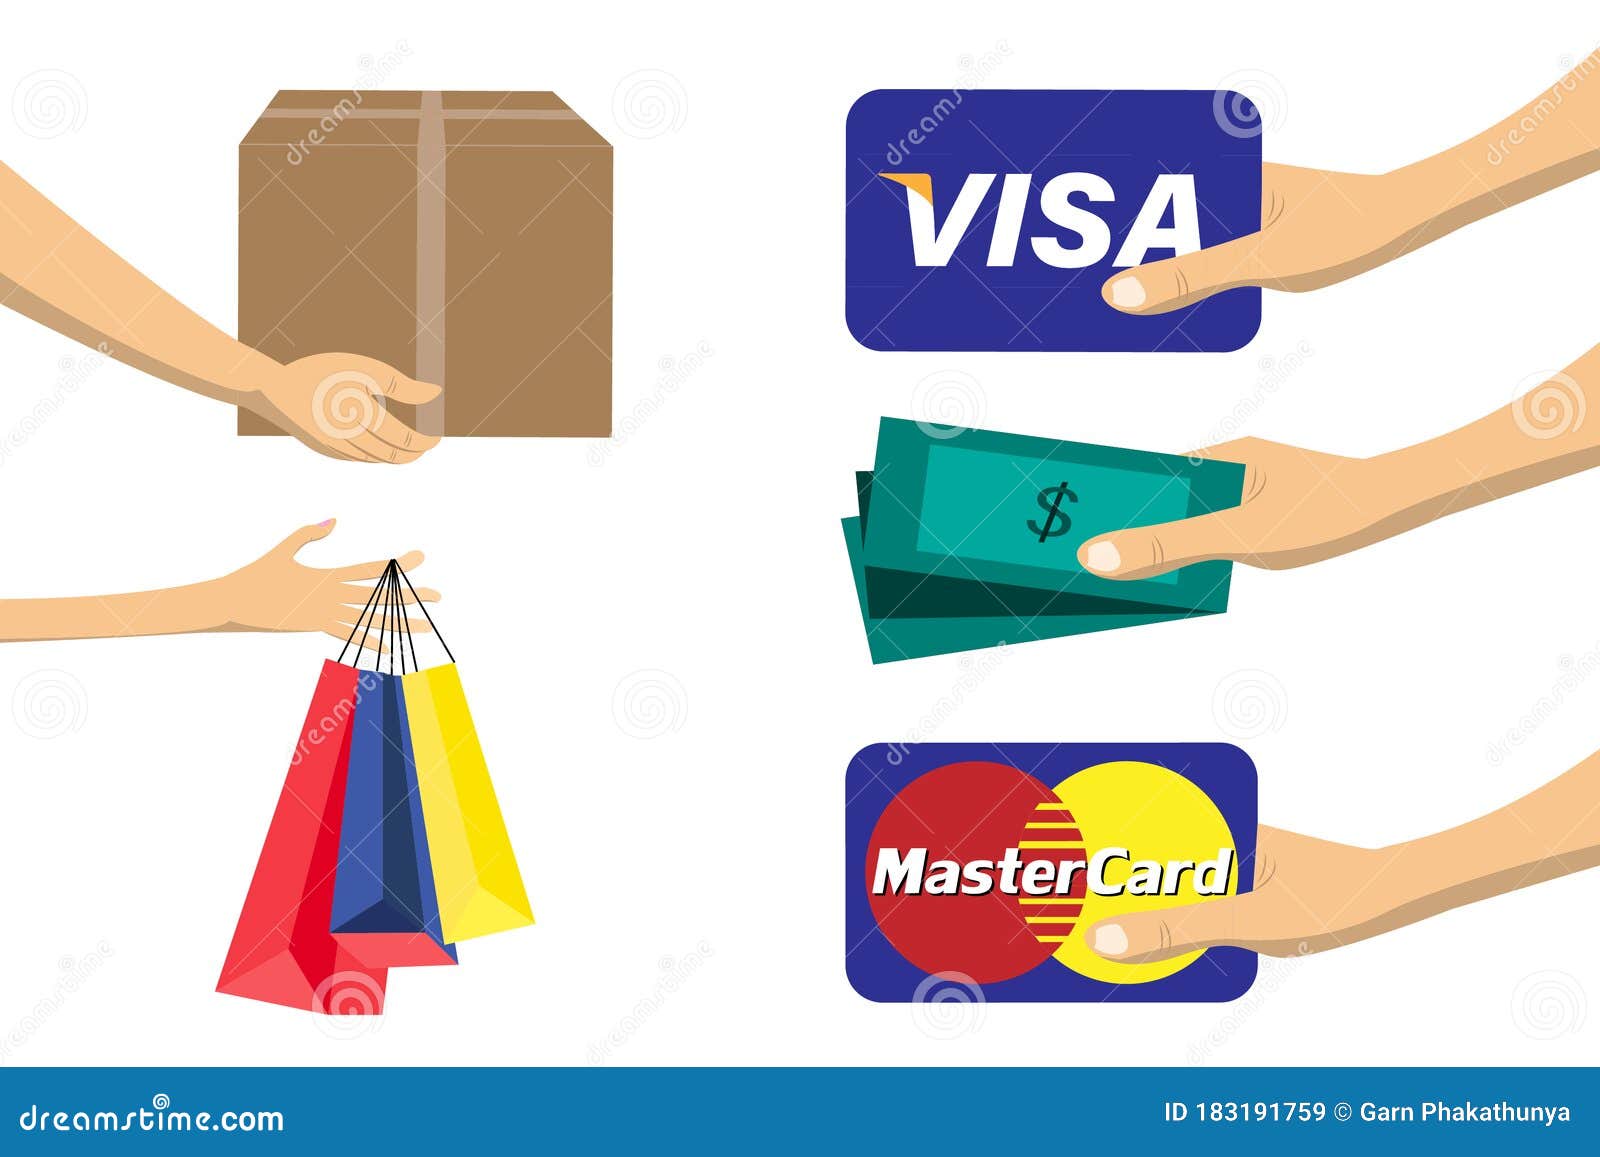 Pay For The Package Order Shopping Online Payment By Cash For Express